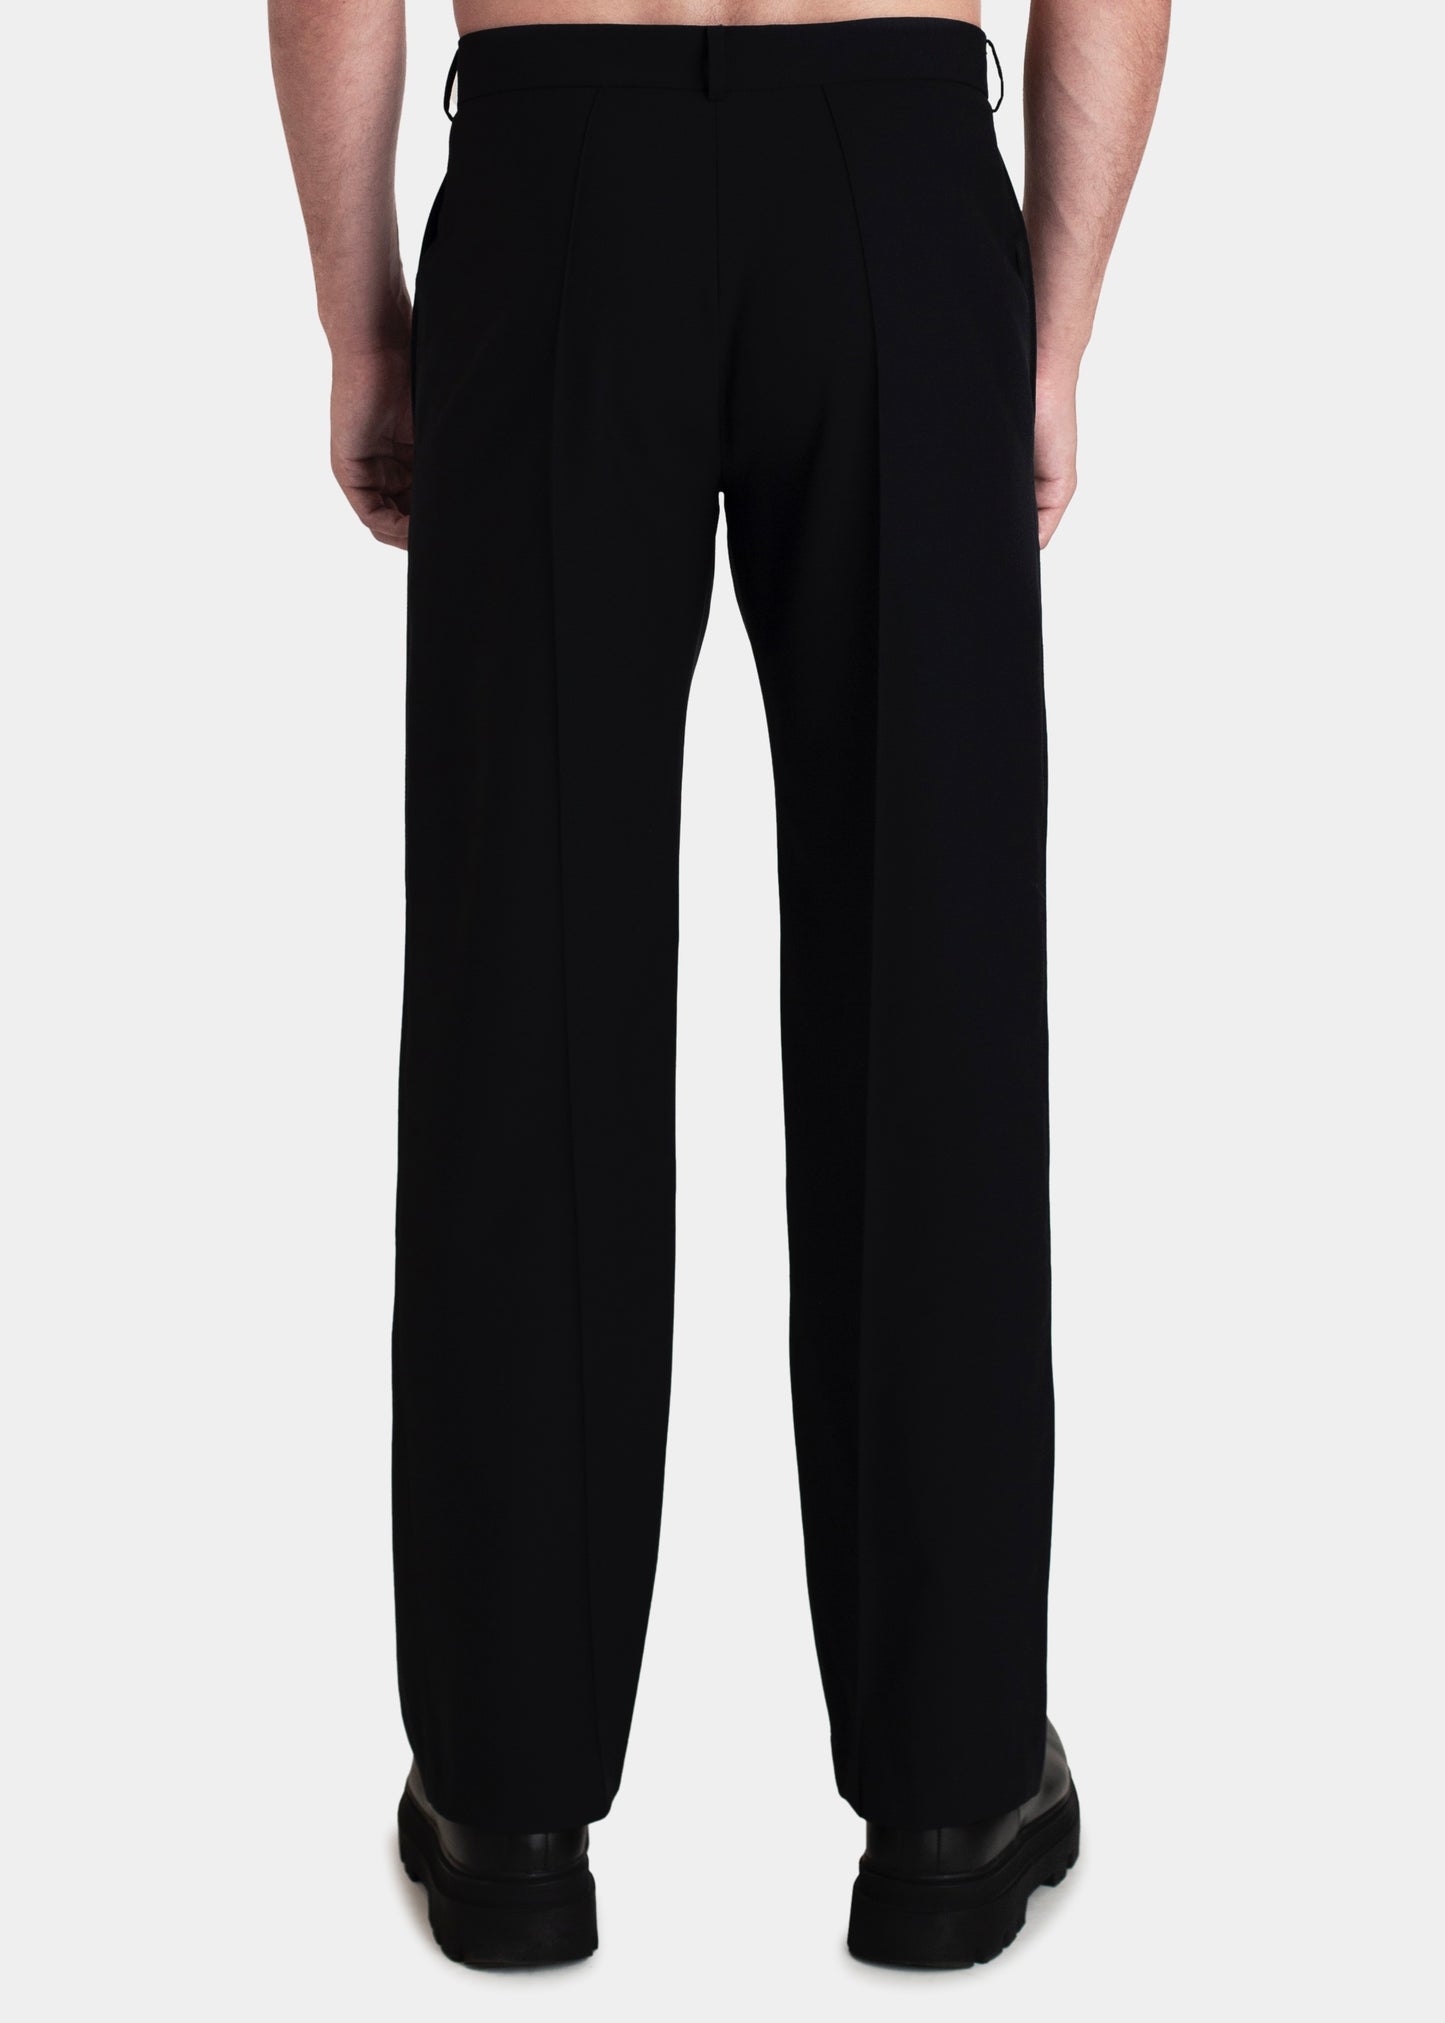 Crys Trousers - Black